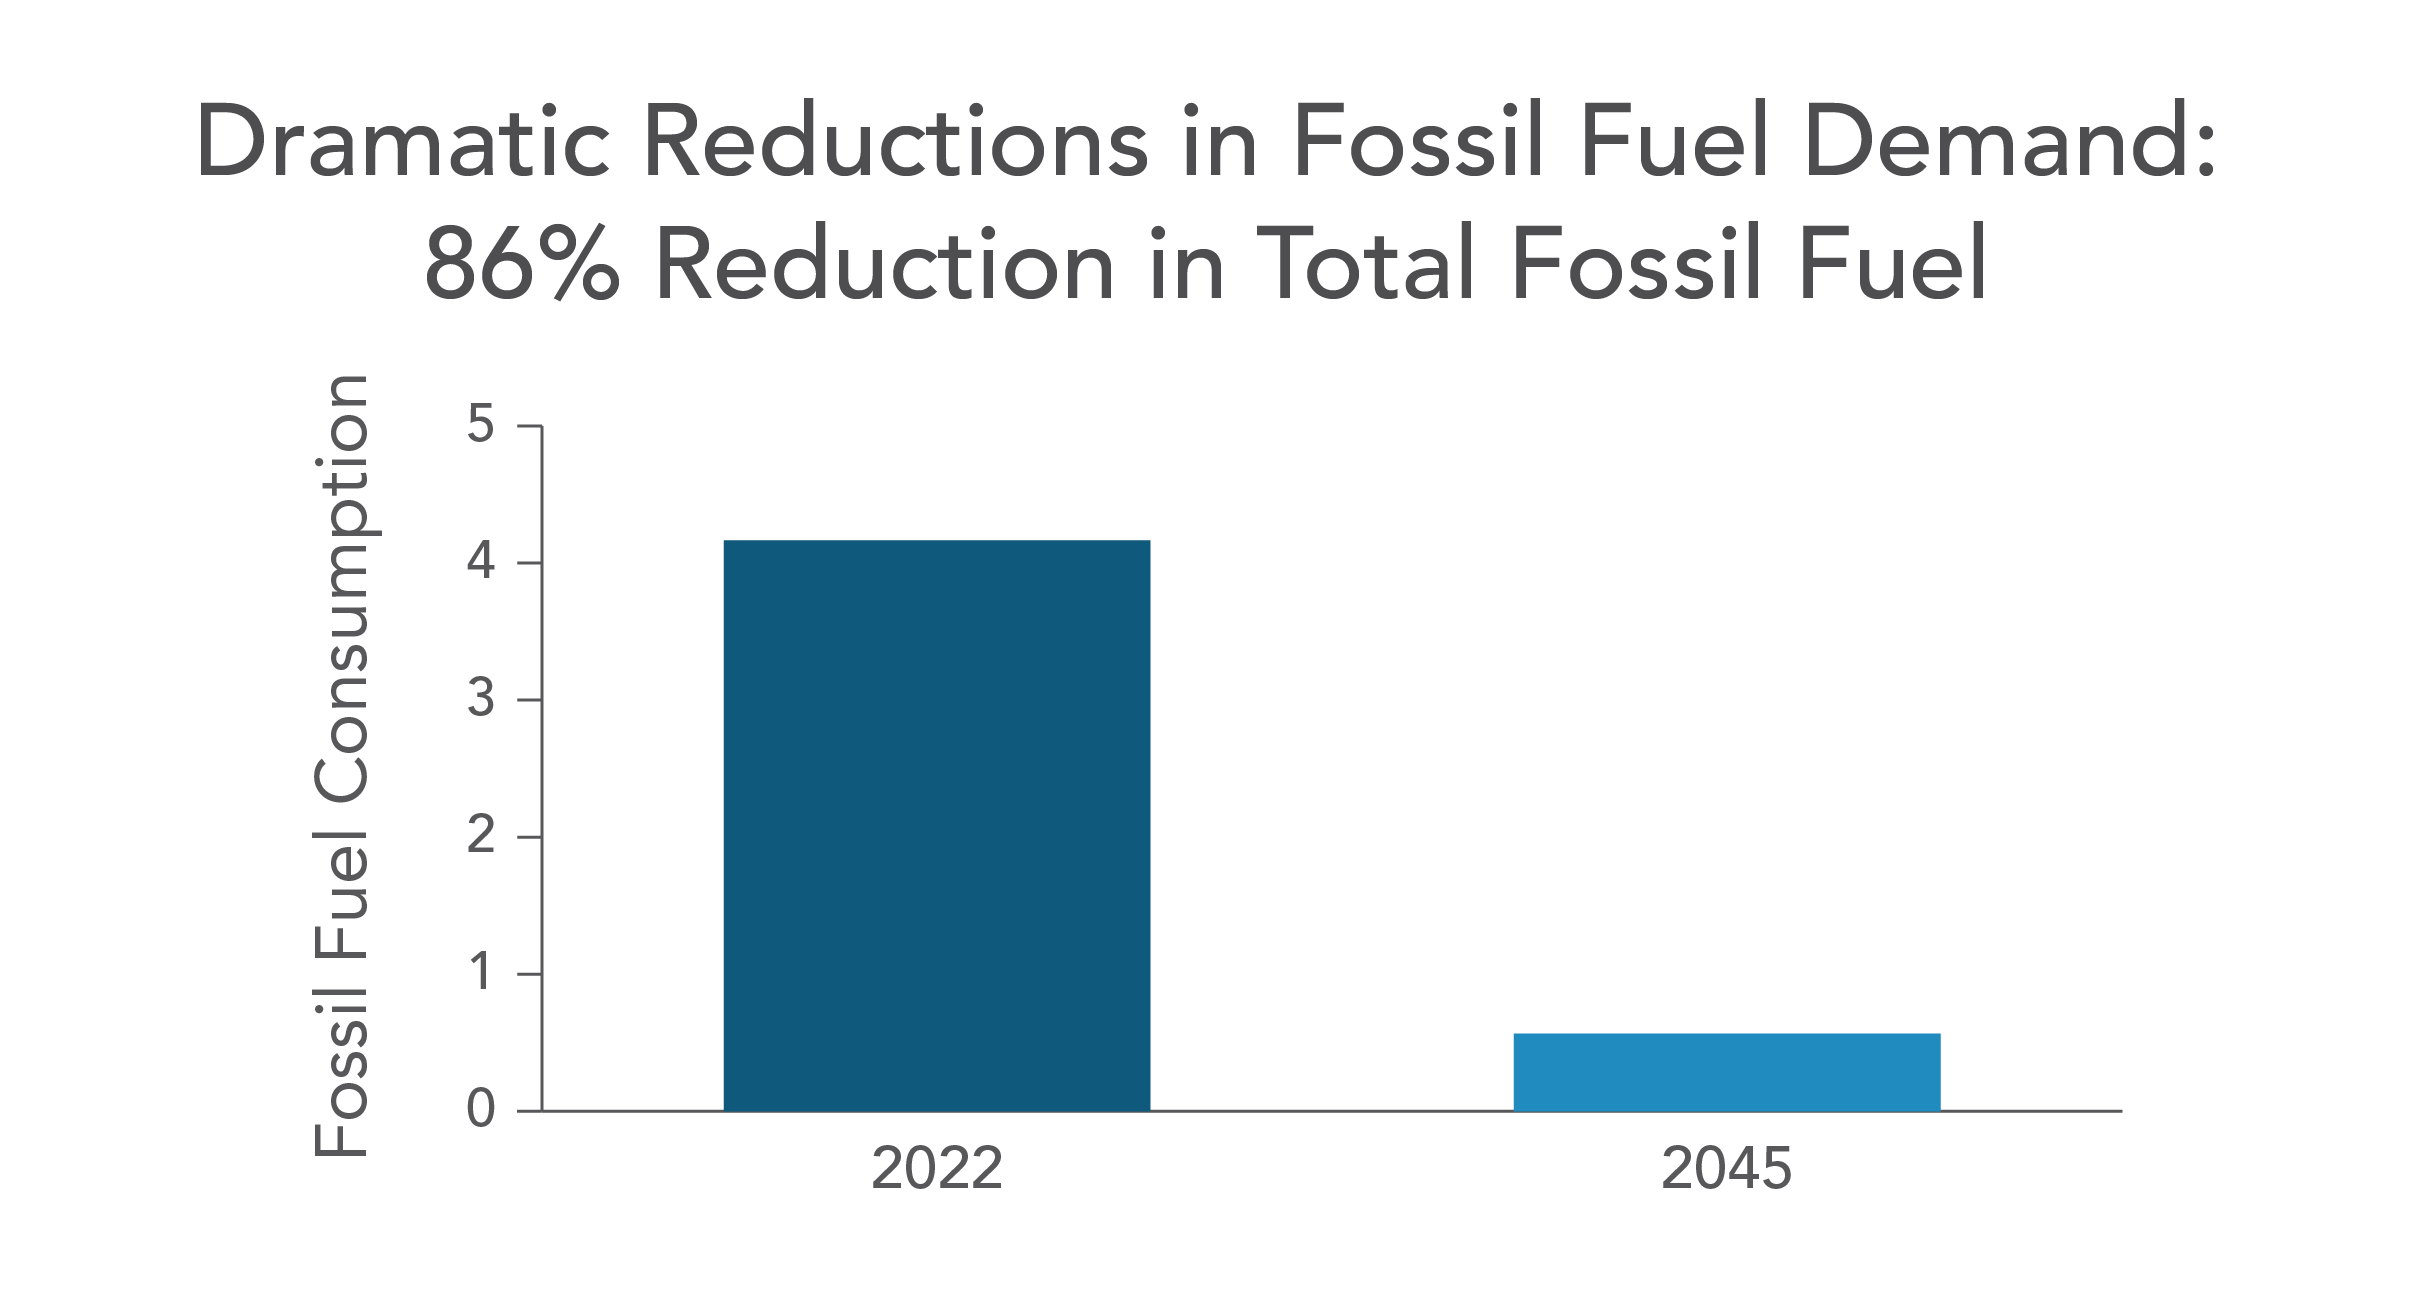 86% Reduction in Total Fossil Fuel